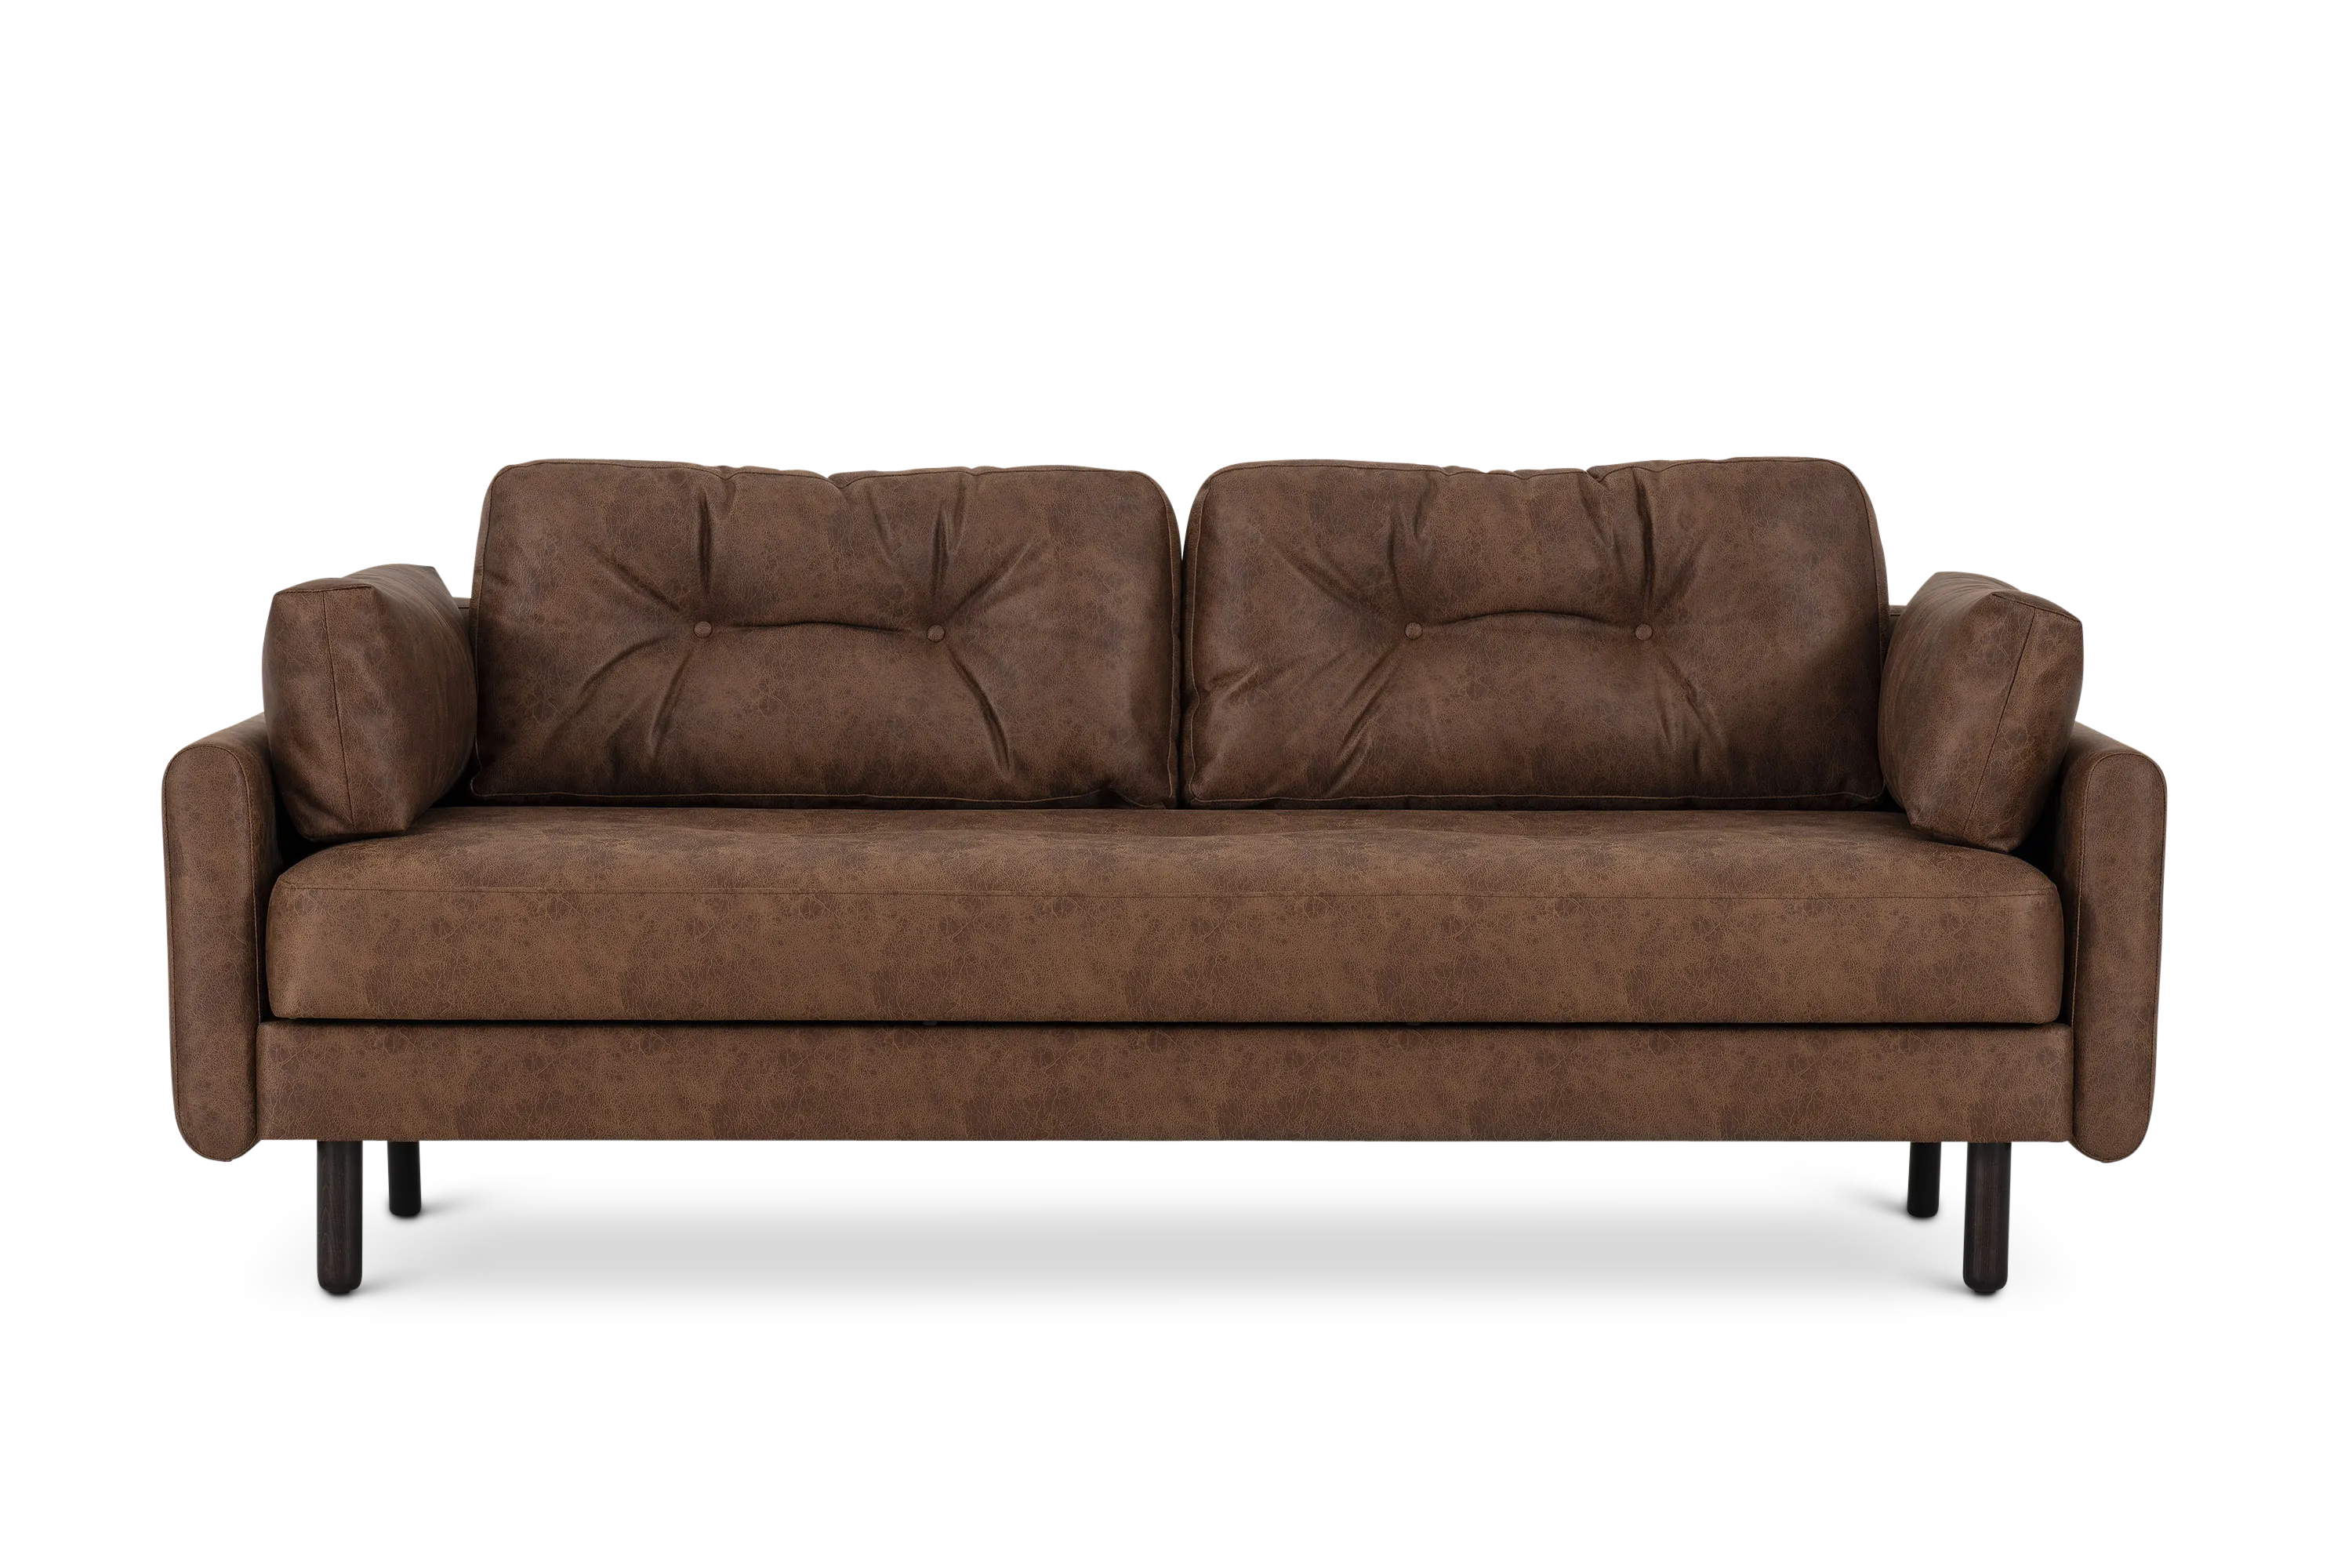 Model 04 3 Seater Sofa Bed 24 Hour